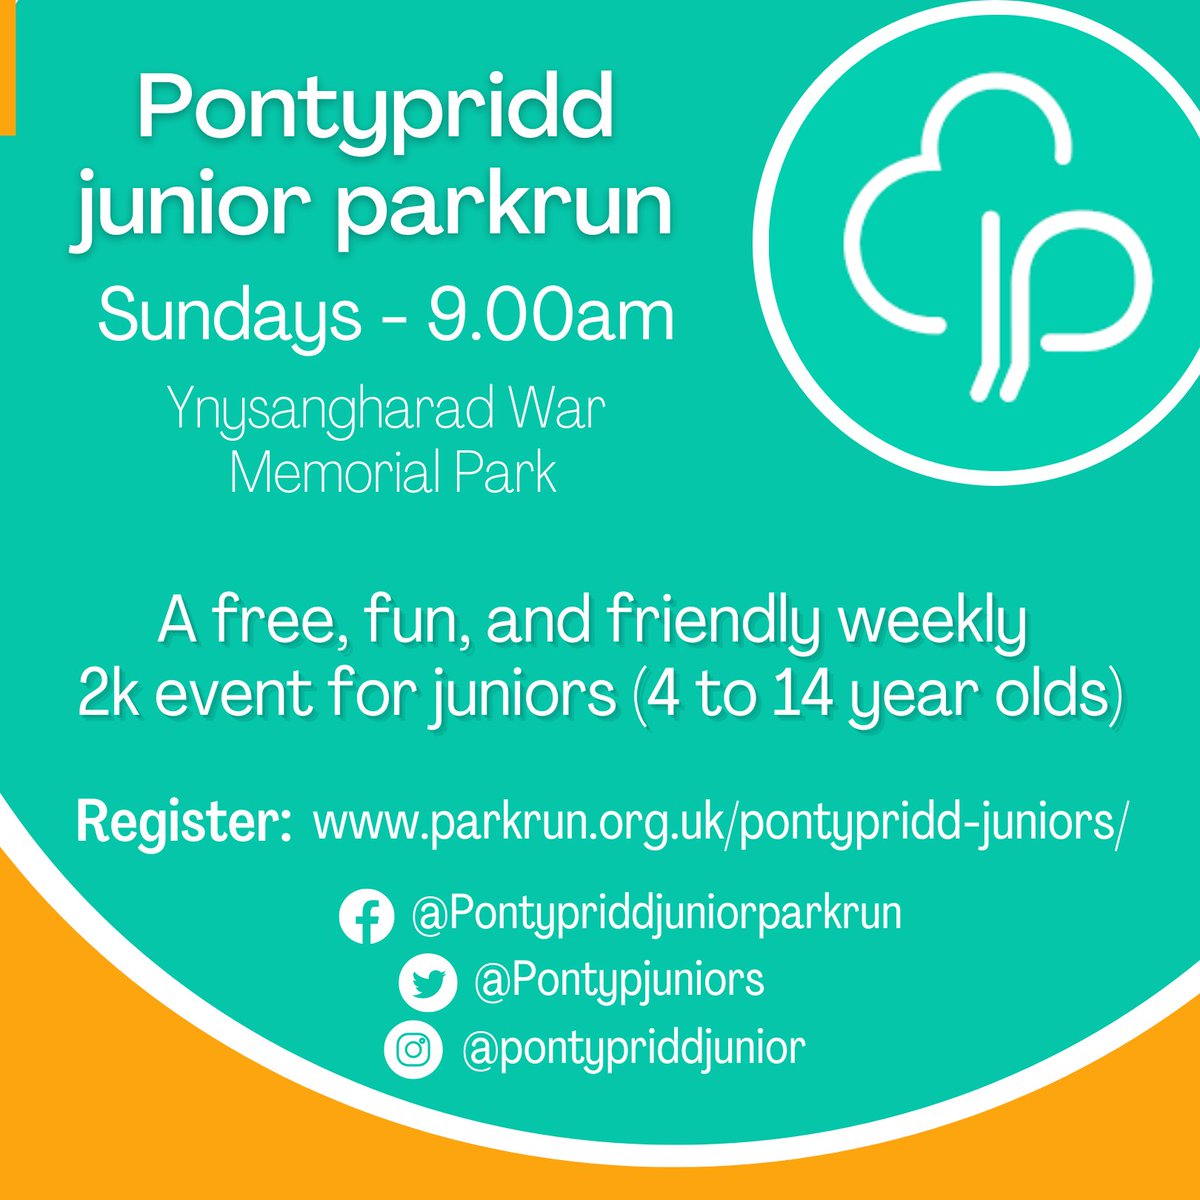 Did you know that there is a Junior parkrun in Pontypridd every Sunday morning? Junior parkrun is a free, fun and friendly weekly 2k event for children aged 4-14 years Find out more - orlo.uk/DDLql Follow their account - @Pontypjuniors